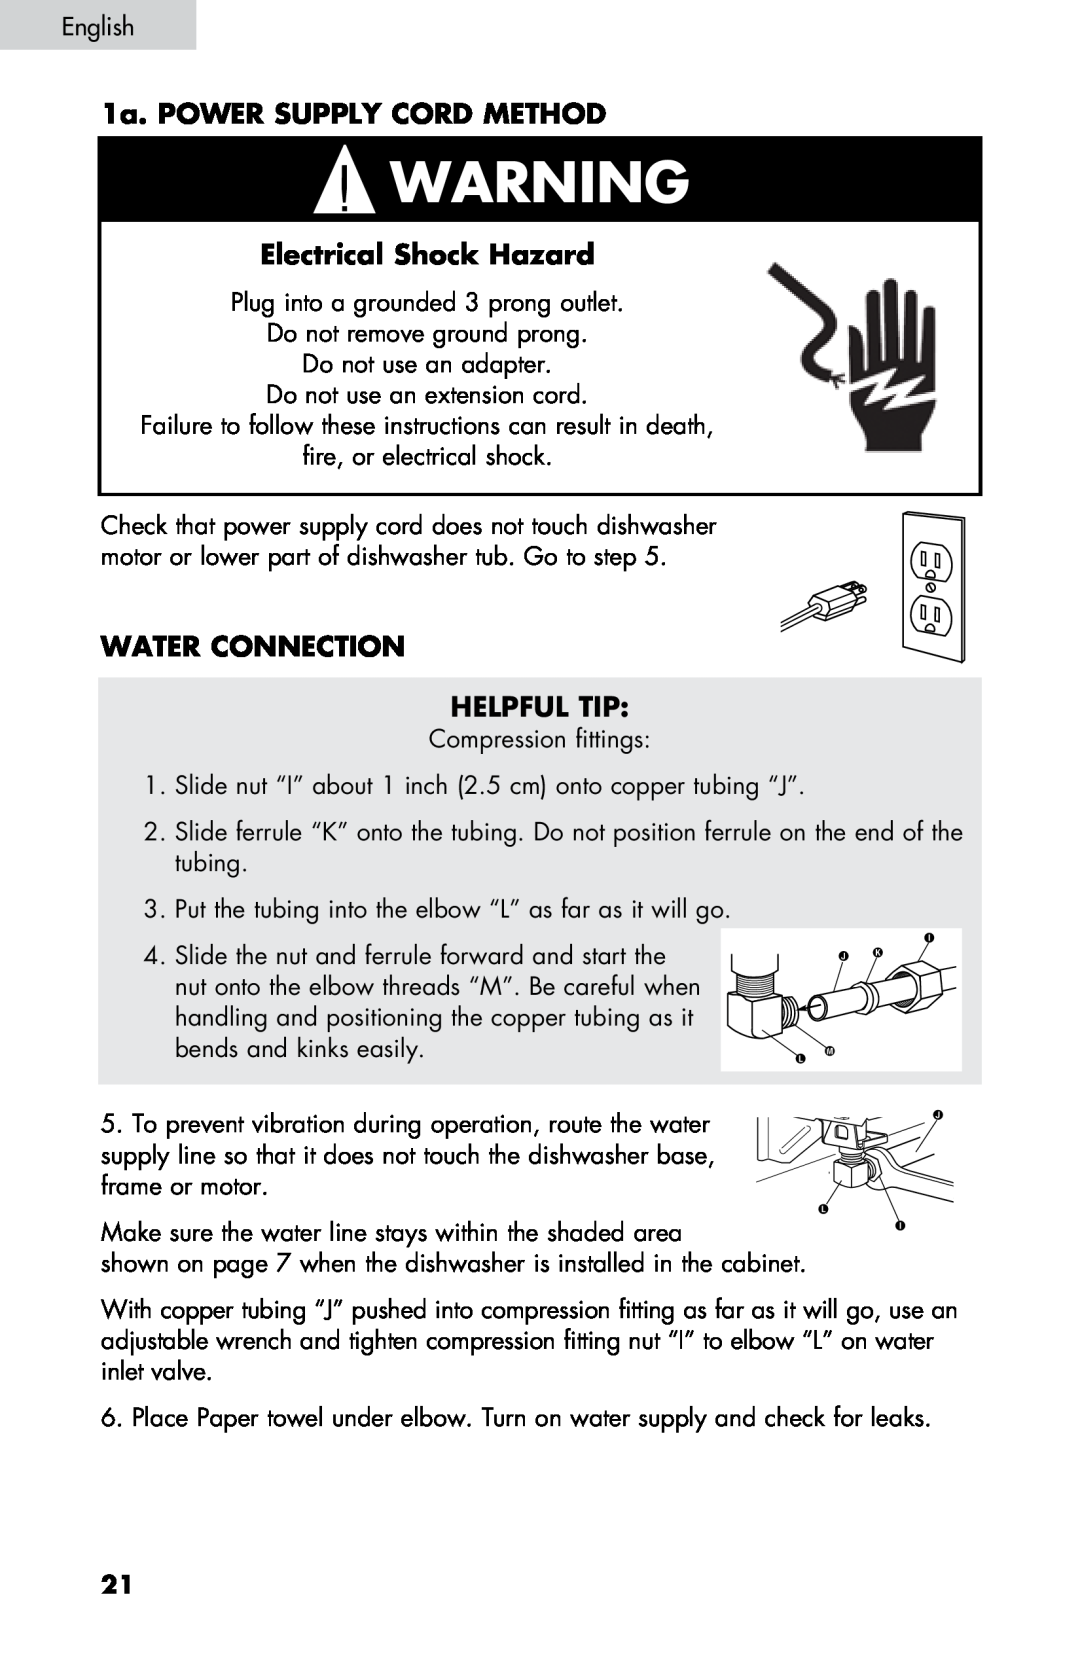 Haier DW-7777-01 manual 1a. Power supply cord method, Water Connection HELPFUL TIP, Electrical Shock Hazard 